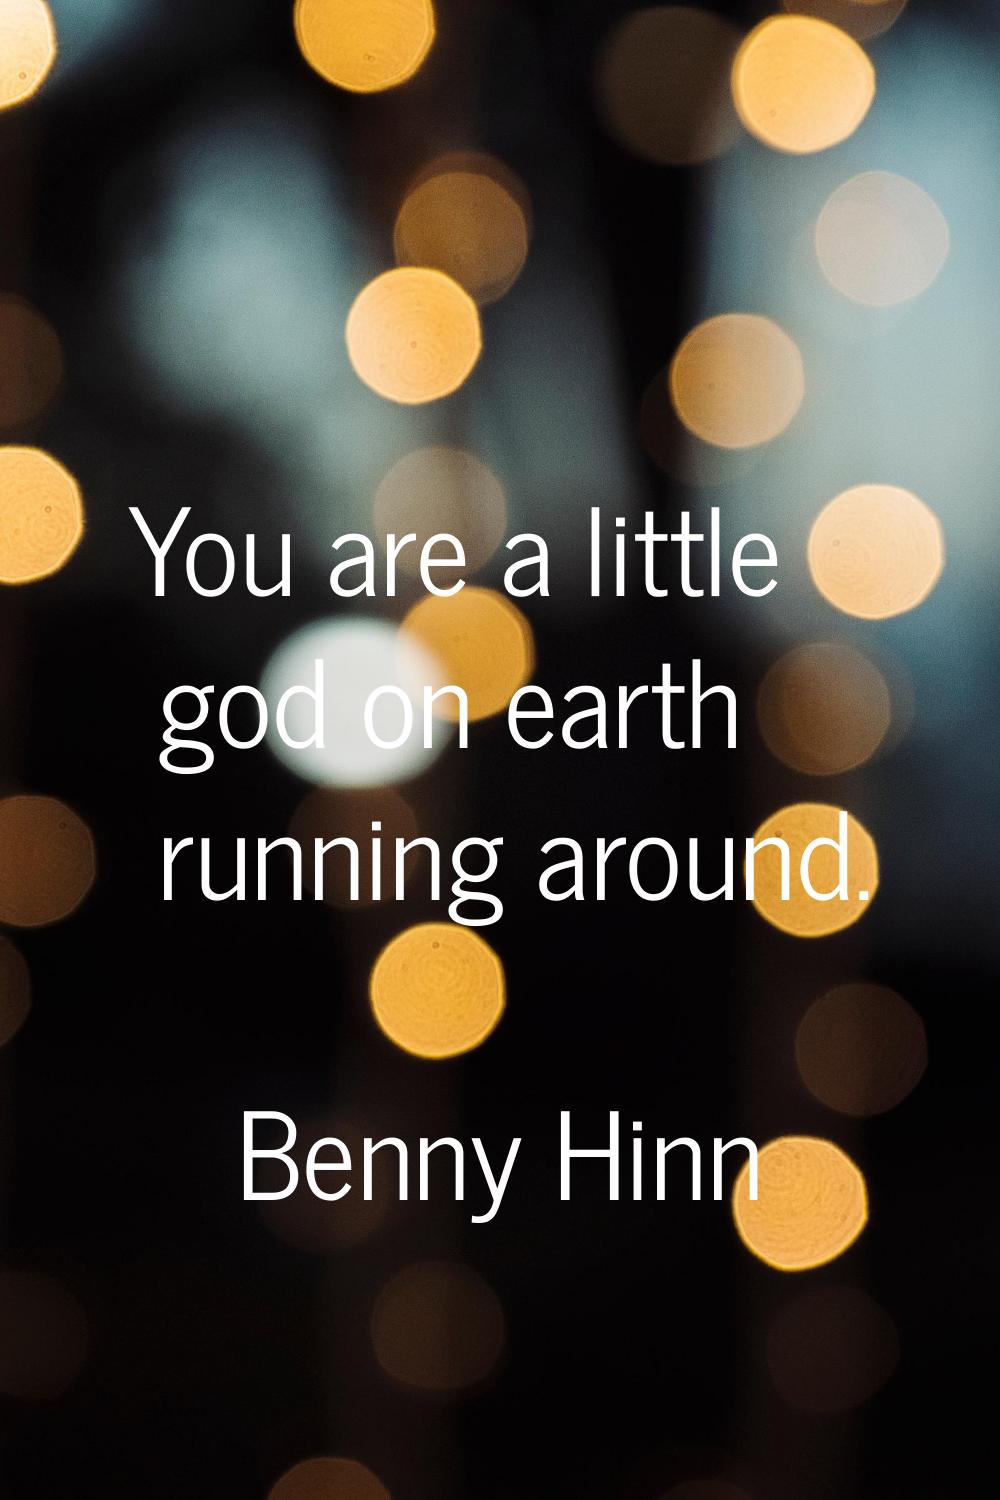 You are a little god on earth running around.